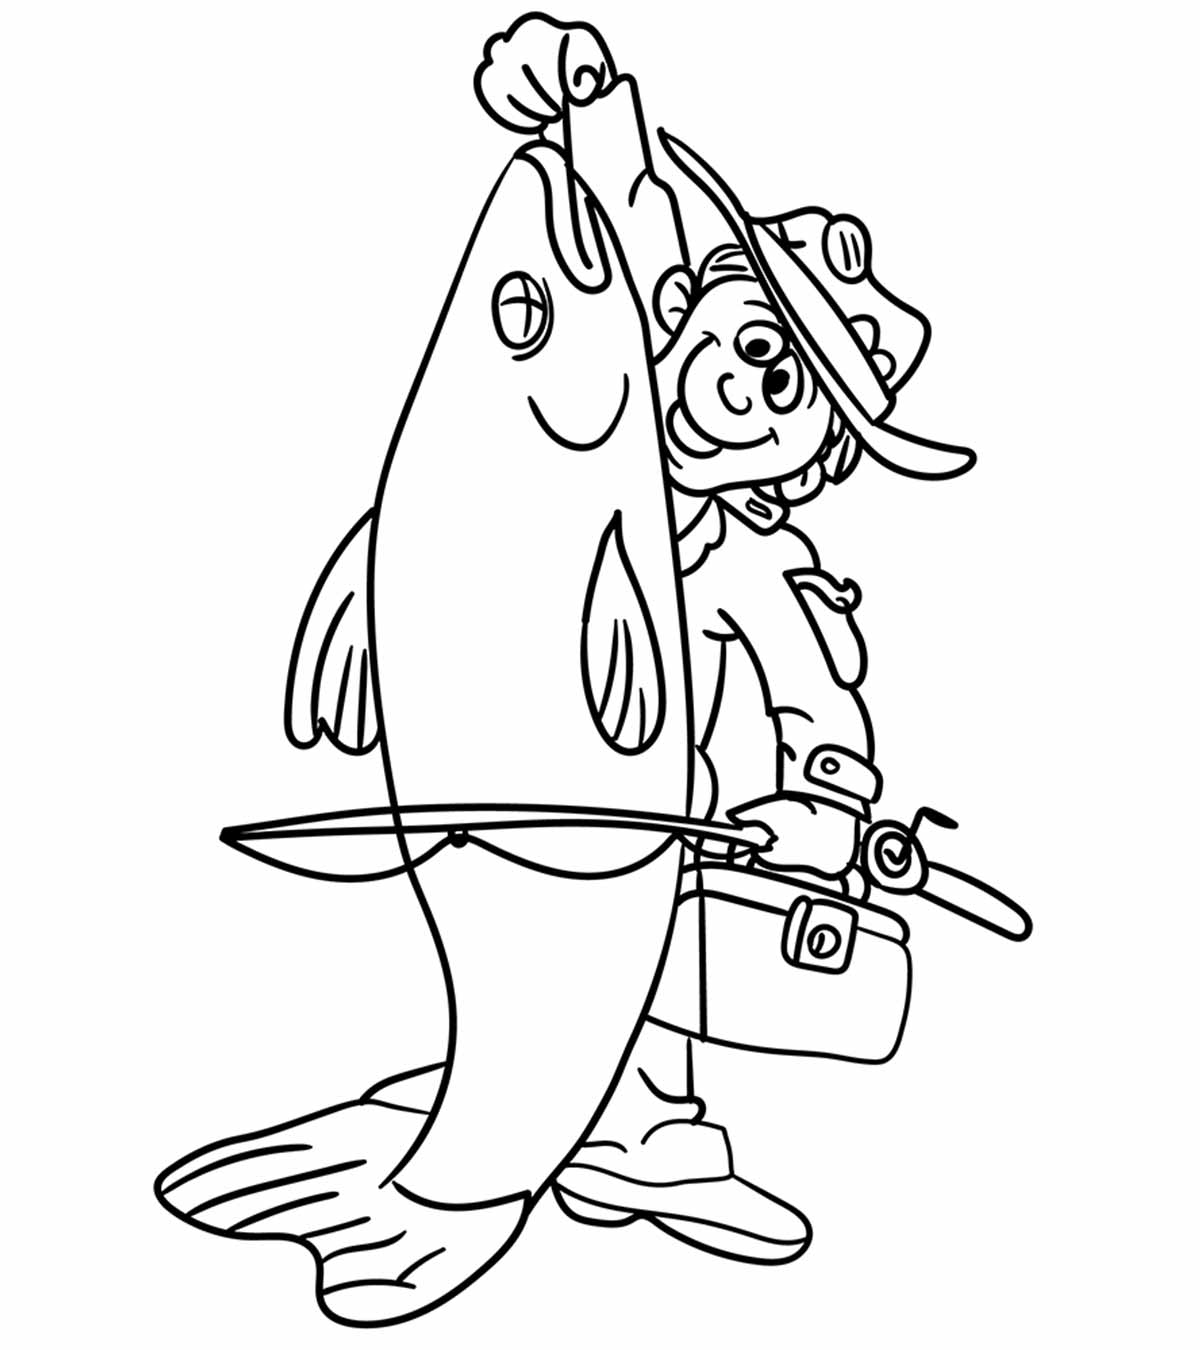 10 Fisherman Themed Coloring Pages For Your Kids_image